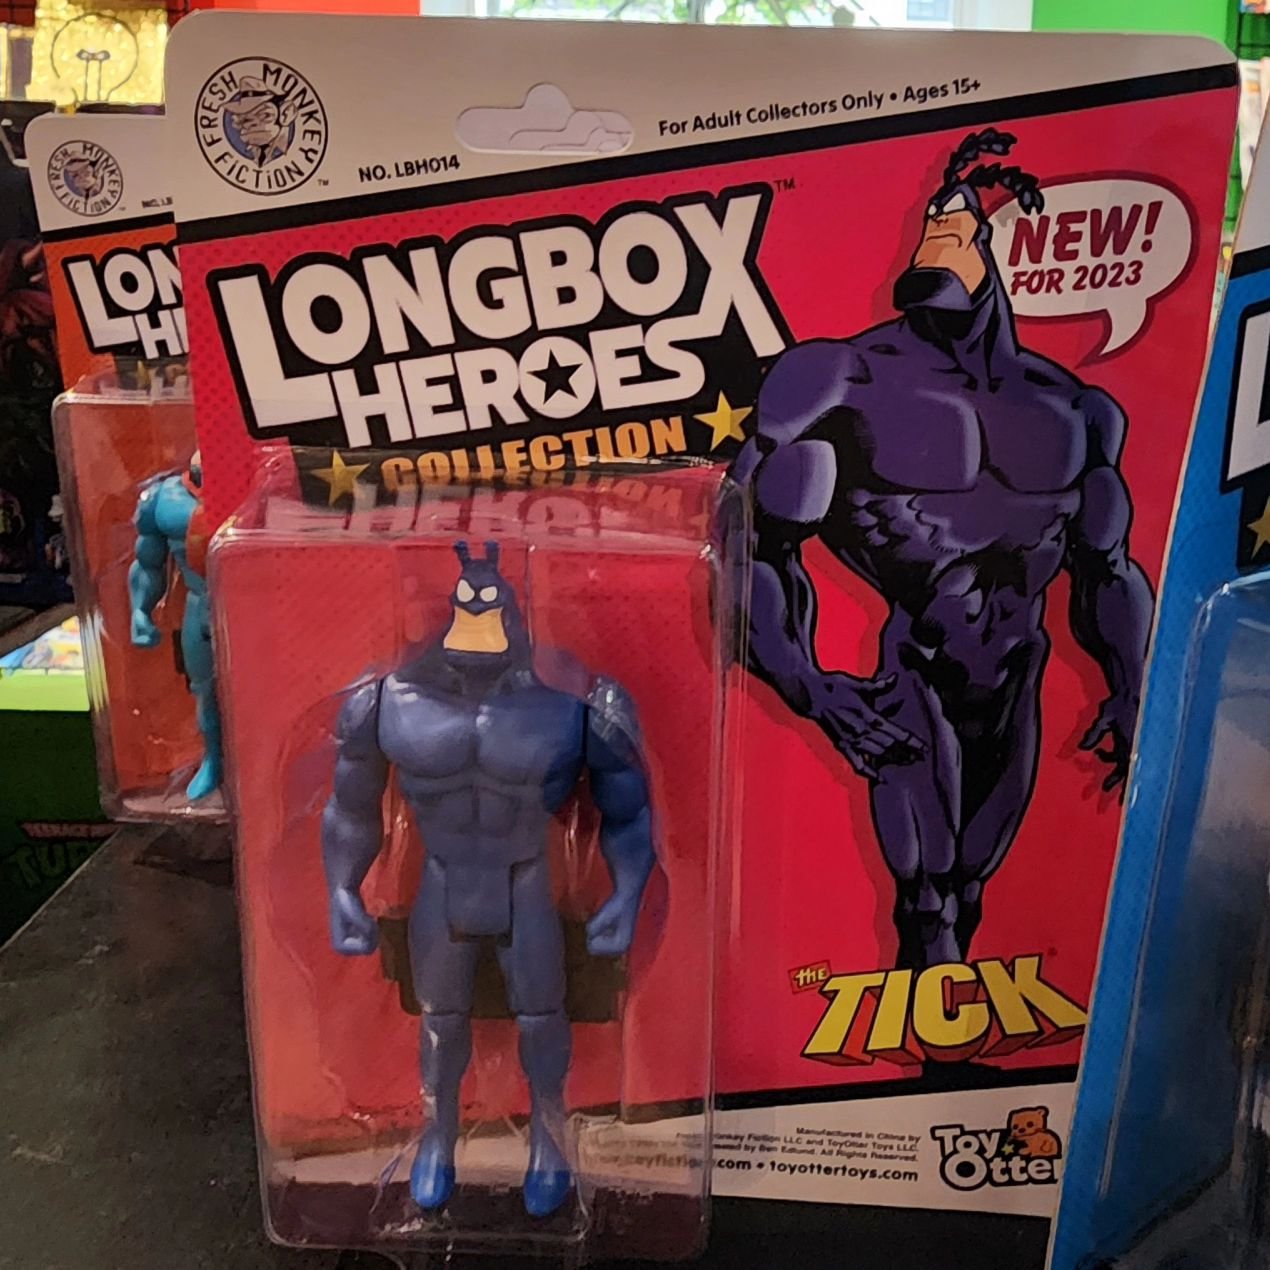 Got some awesome new #actionfigures in like #TheTick #Madman and the #Goon!

#EastSideMags #comics #comicbooks #toys #collectibles #fun #community #montclairnj #montclaircenter #shopeatrepeatmontclair #loveourmontclair #love